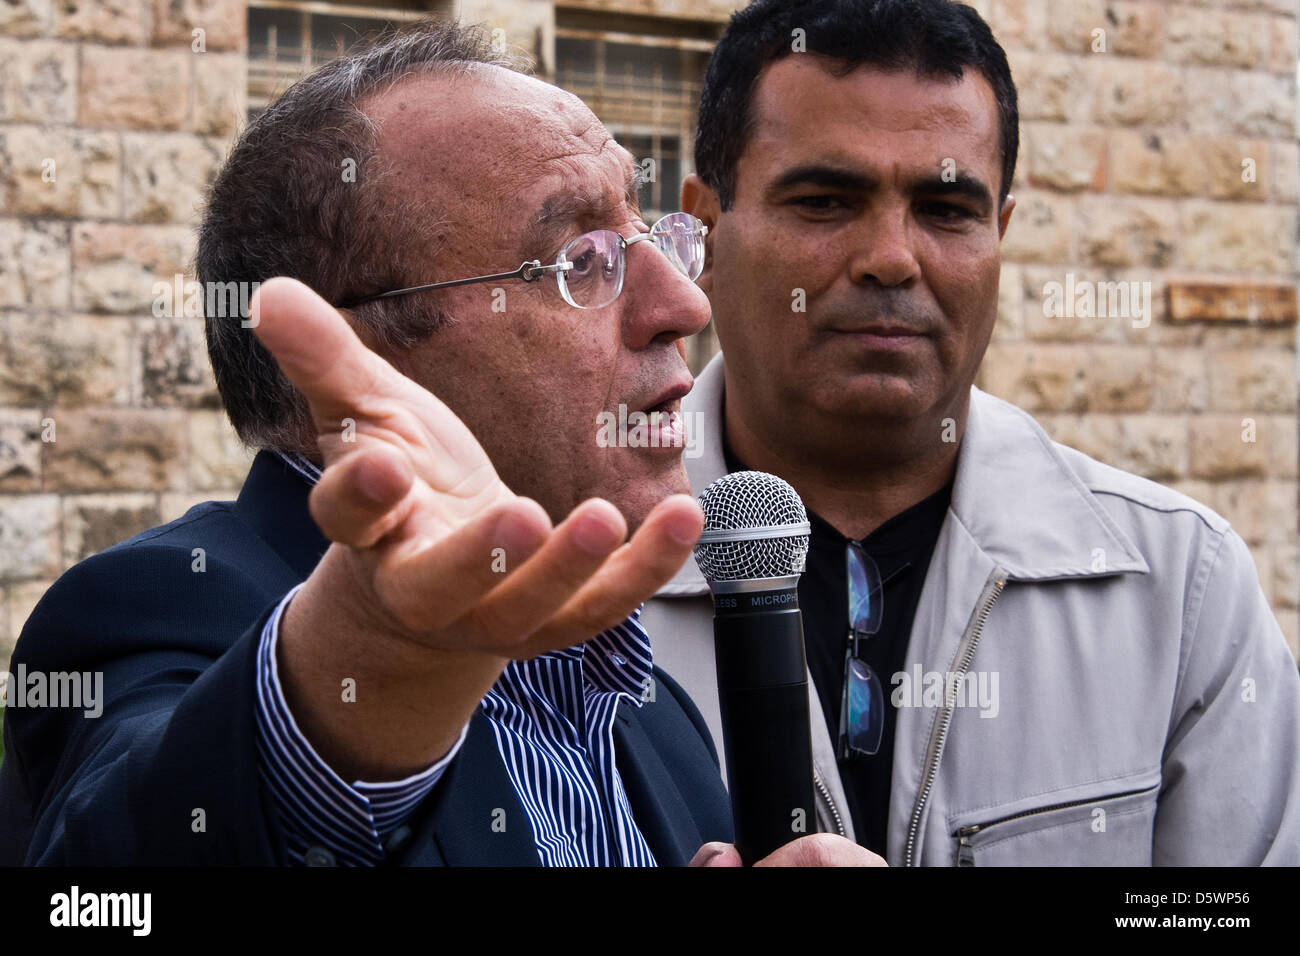 Jerusalem, Israel. 9-Apr-2013. Yussef Asad Radwan, Abu-Haled (C), born 1939 in Deir Yassin, stands before a structure which served as his elementary school until 1948 when the village was invaded and destroyed. Today the structure serves as a Chabad Jewish religious center.   Deir Yassin, a pre-1948 Arab village adjacent to Jerusalem with a population of about 600, was invaded by paramilitaries from the Jewish Irgun and Lehi groups on April 9, 1948 and around 115 villagers were massacred. Credit: Nir Alon/Alamy Live News Stock Photo